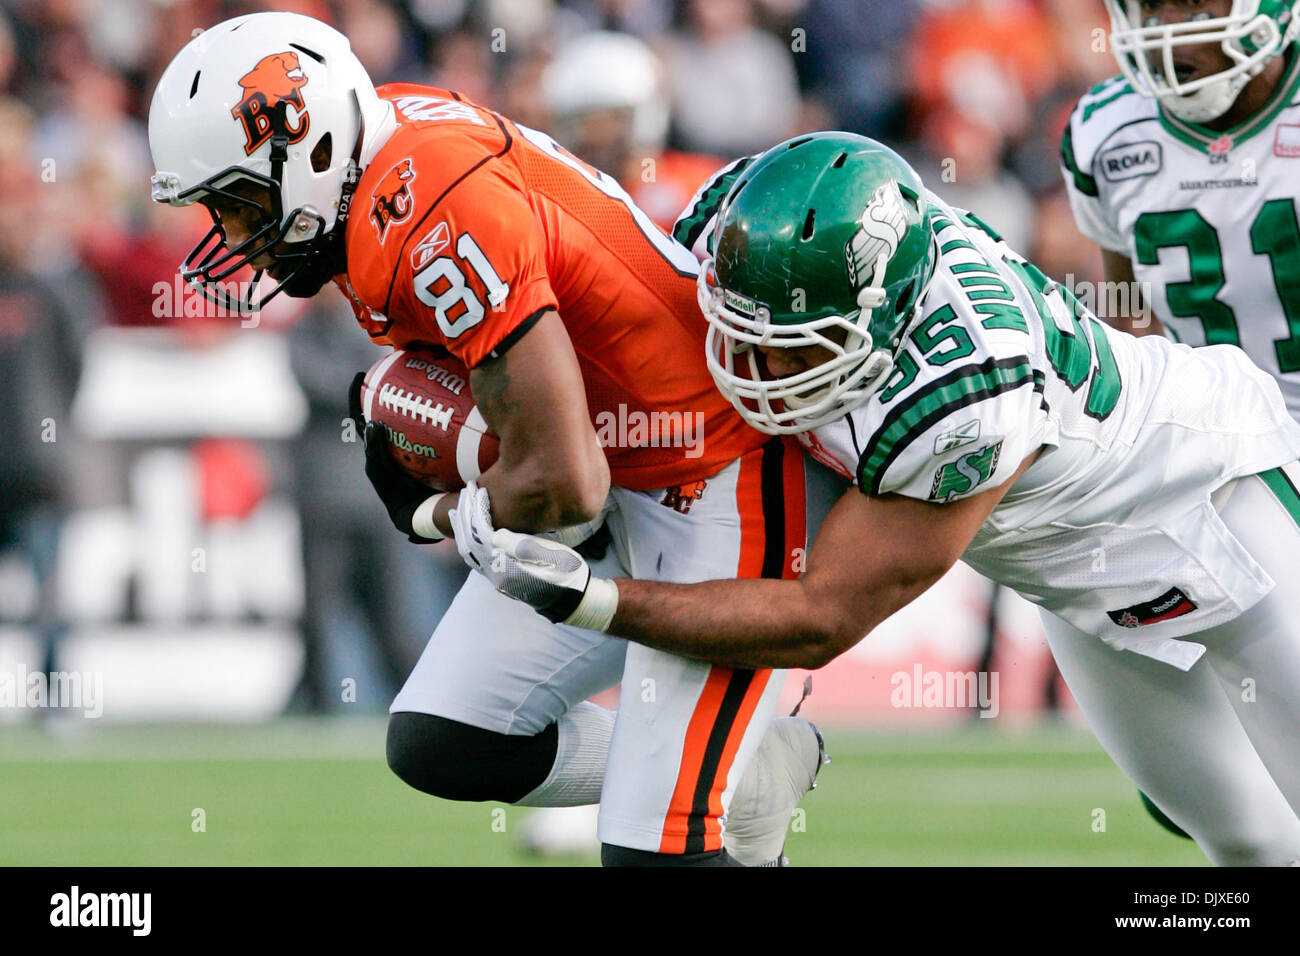 Oct. 31, 2010 - Vancouver, British Columbia, Canada - Lions #81 SB Geroy Simon getting tackled by Roughriders #95 DE Luc Mullinder during the sunday game at Empire field BC Lions won the game with a score of 23 to 17 against the Saskatchewan Roughriders for their last home game of the season (Credit Image: © James Healey/Southcreek Global/ZUMApress.com) Stock Photo